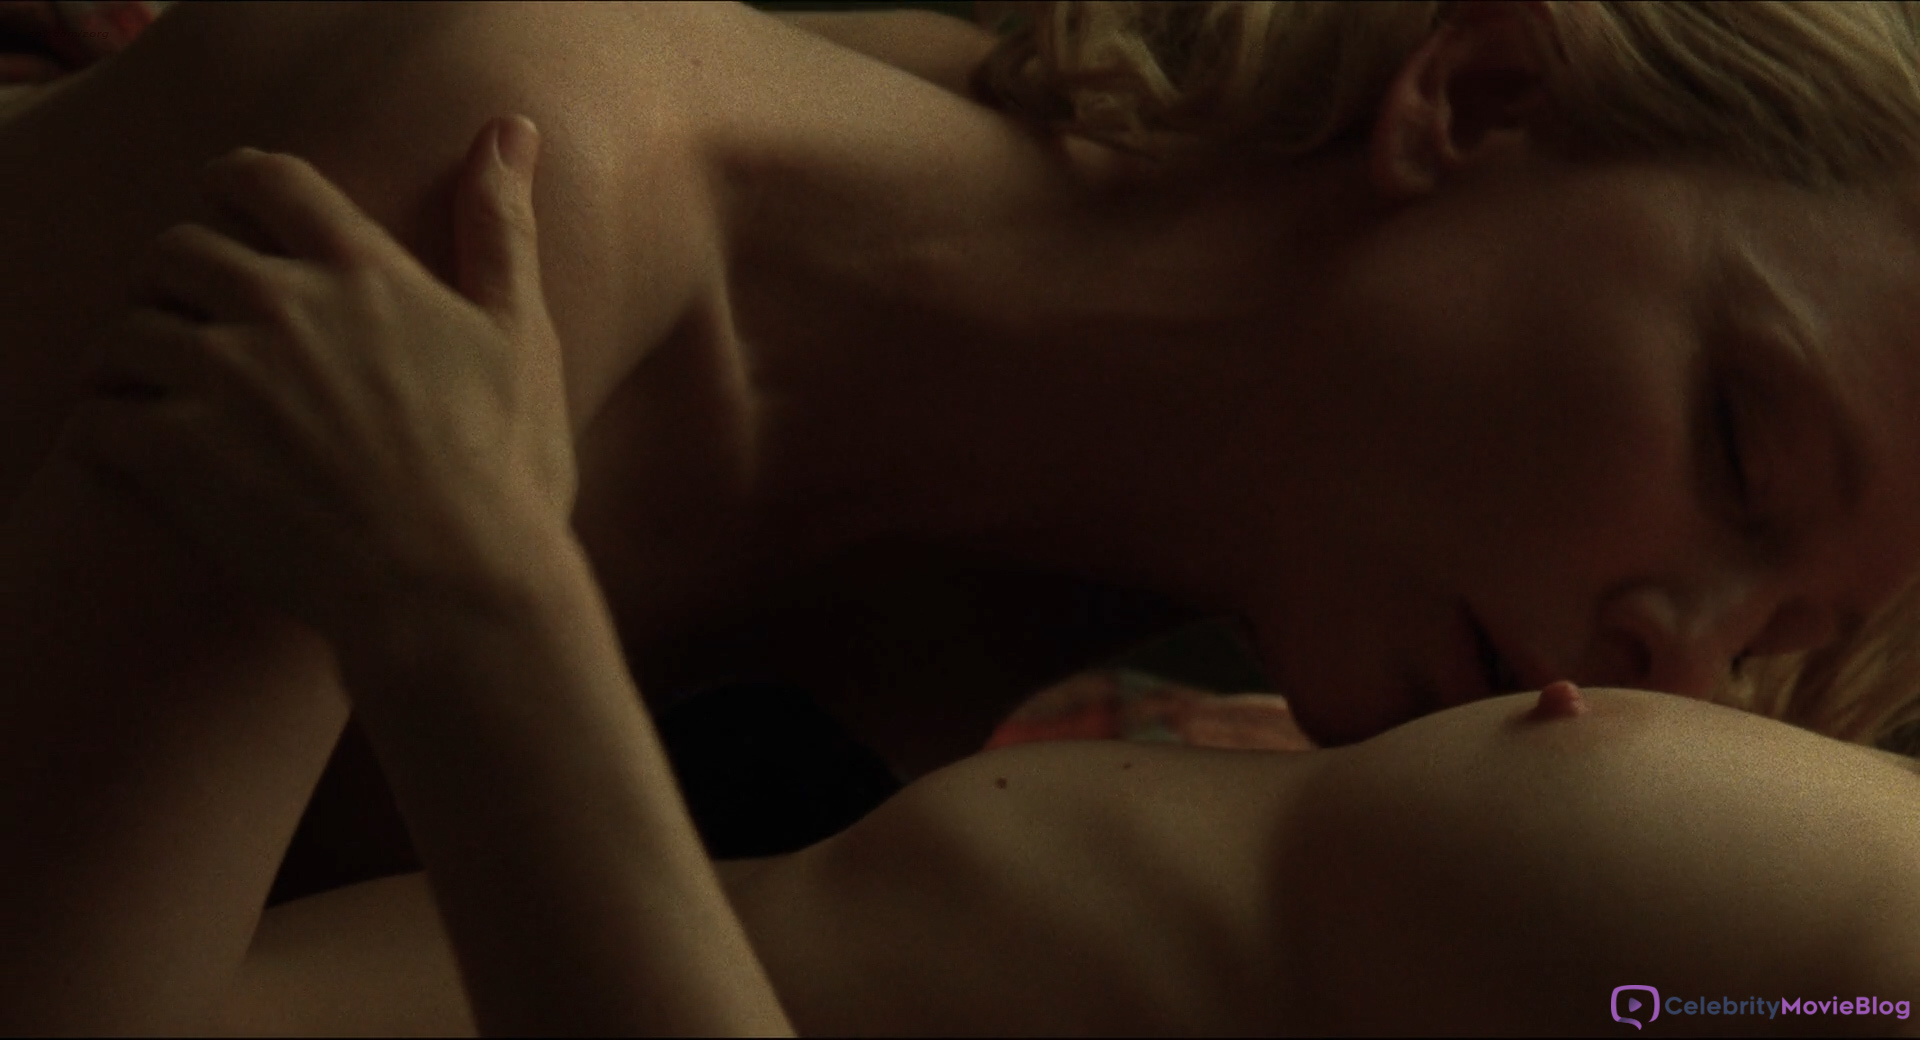 Cate blanchett ever been nude